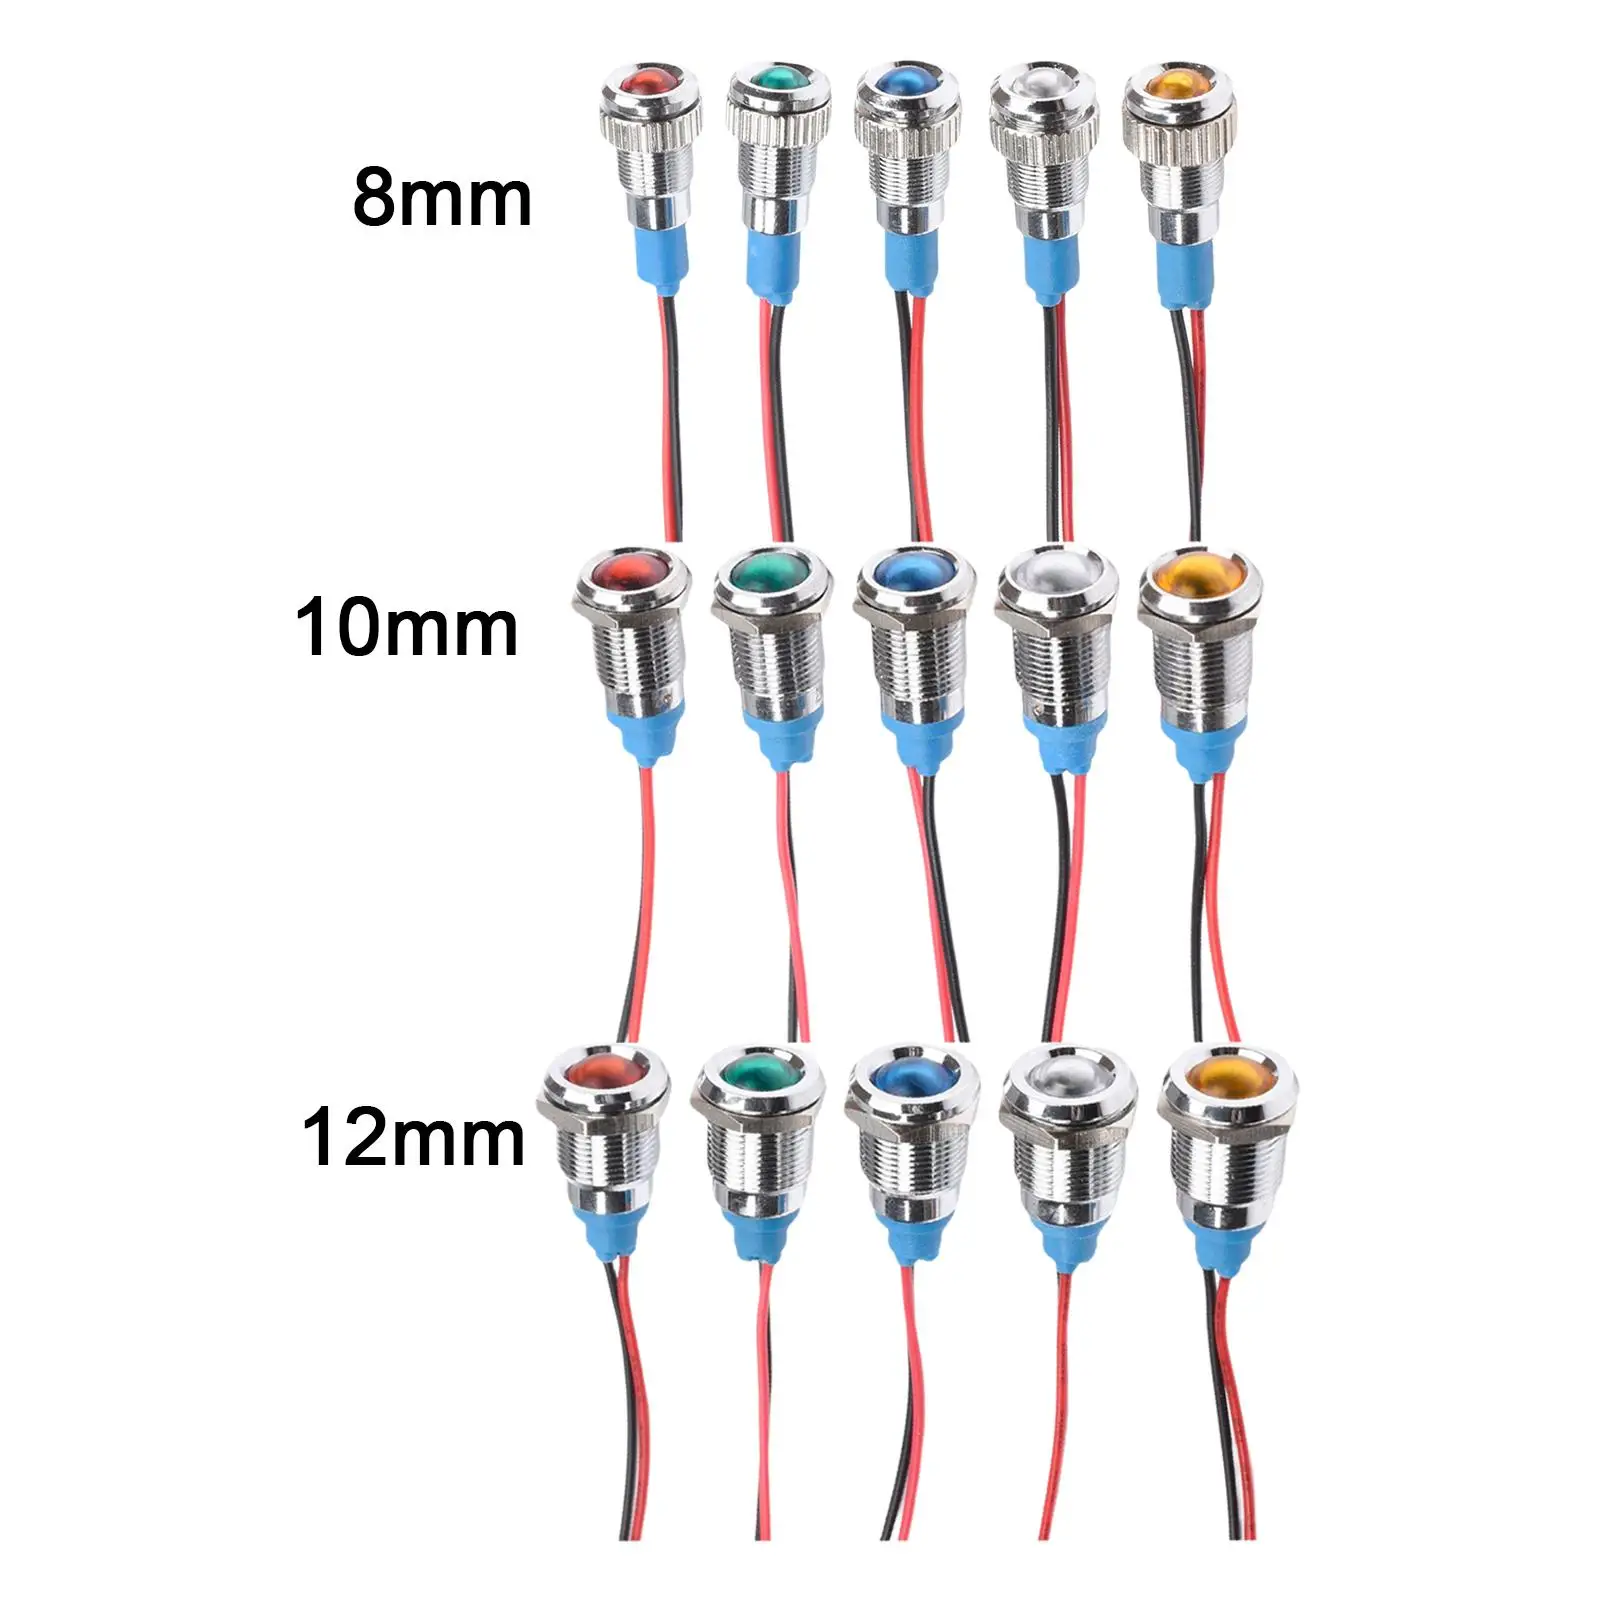 5 Pieces LED Metal Indicator Light, 3-220V Signal Lamp Waterproof with Wire for Pilot  directional Light Truck Boat Car